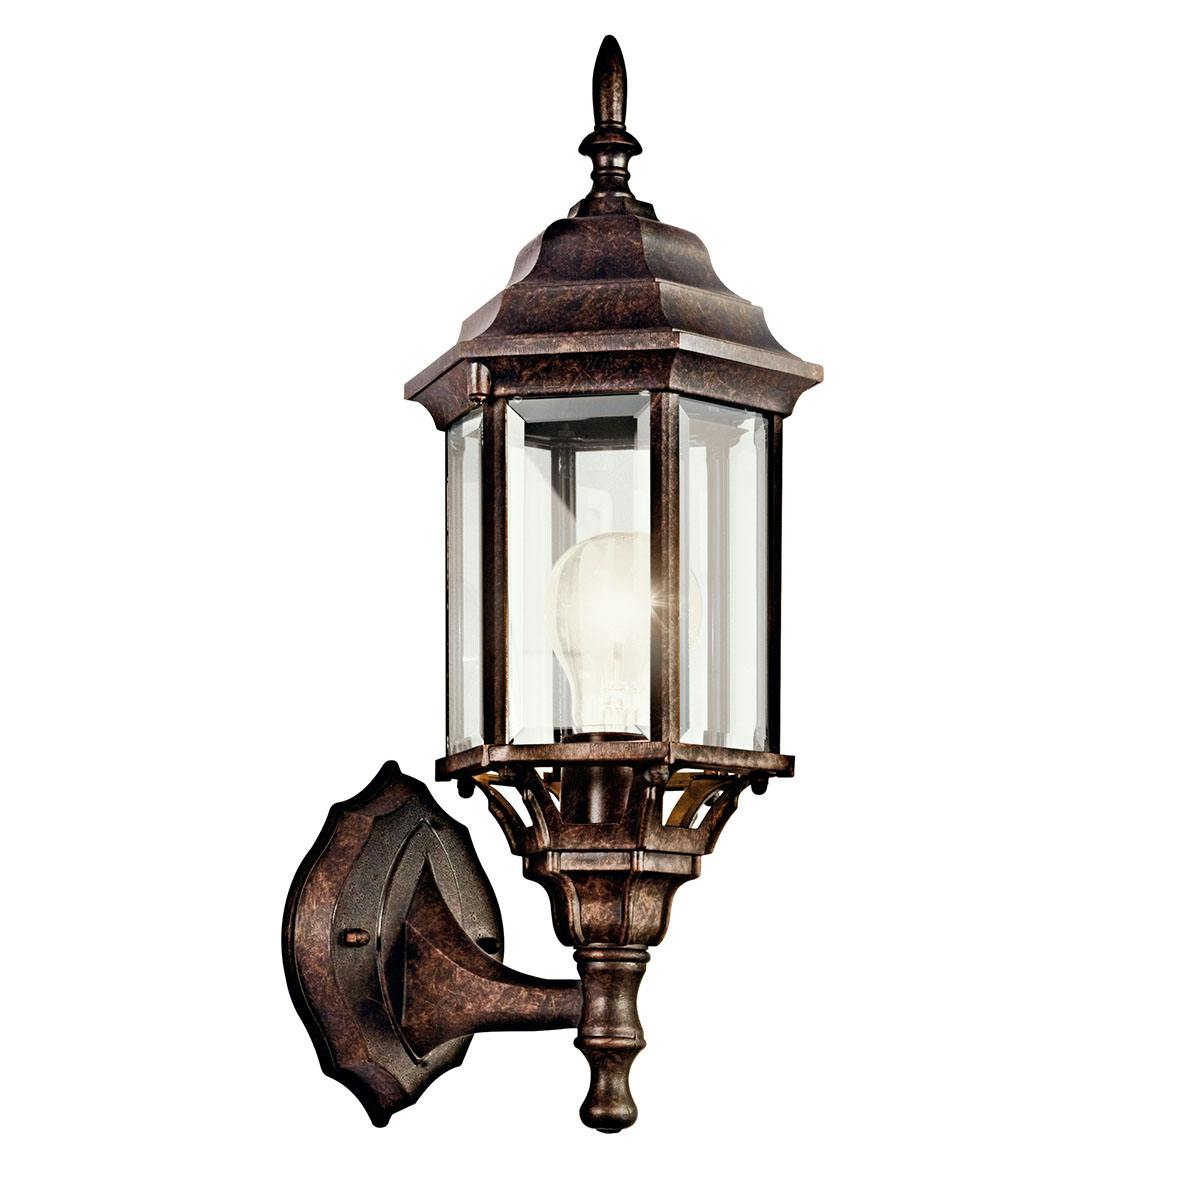 Chesapeake 17" Wall Light Tannery Bronze on a white background